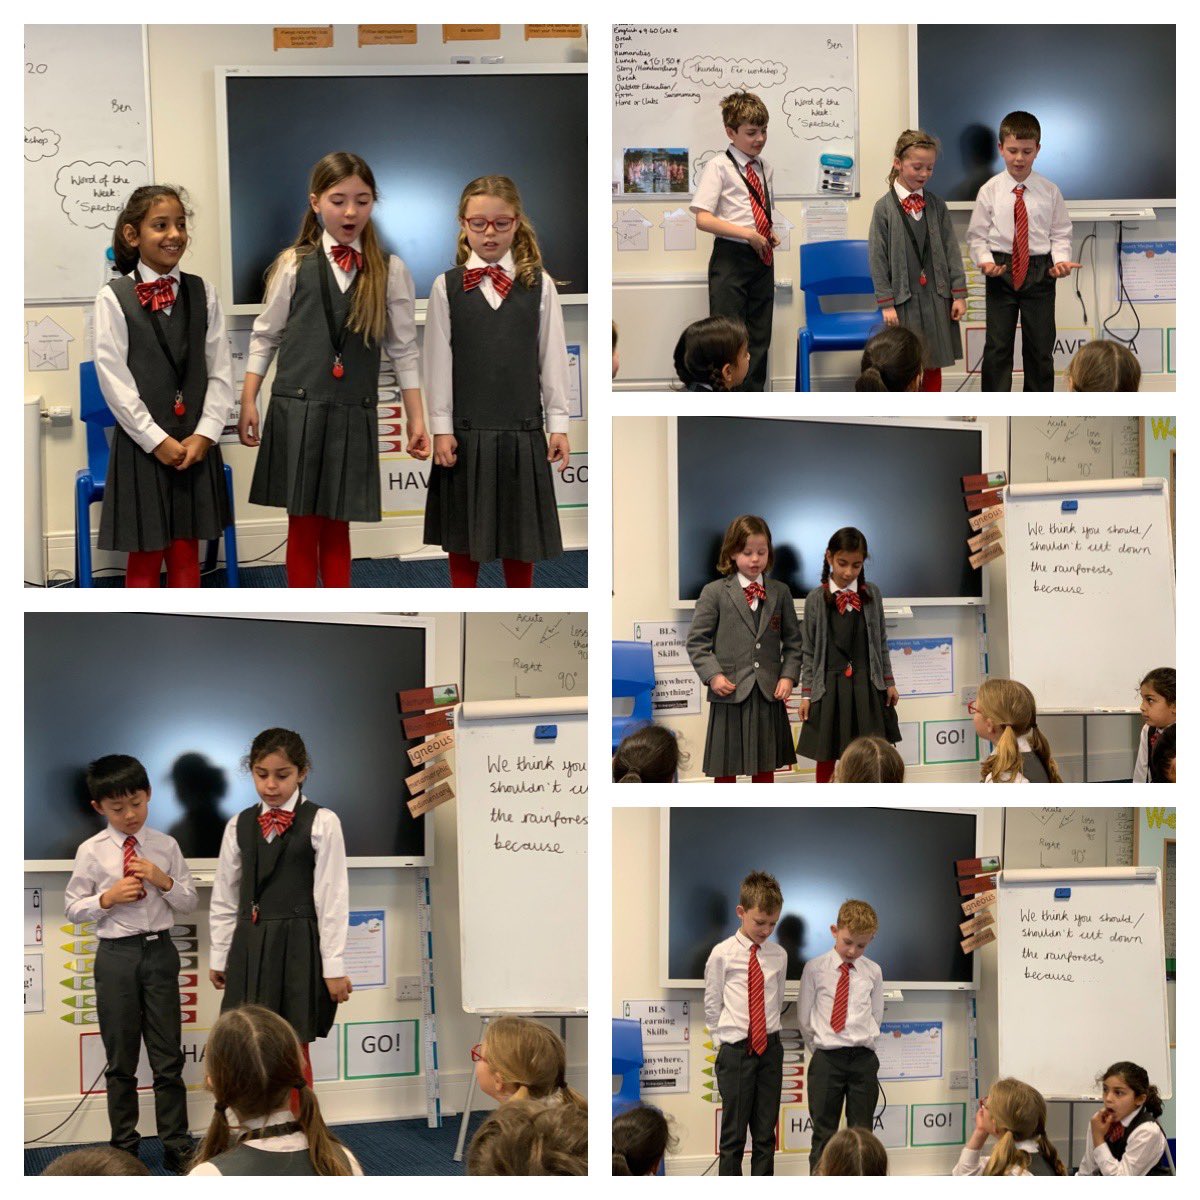 Today we became ... Conservationists, Loggers, Cattle Farmers, Pharmacists and Tribes Men and Women. The children presented their cases for and against deforestation despite all of them passionately wanting to SAVE OUR RAINFORESTS #BGSYear3 #BGSCollaboration #BGSHumanities